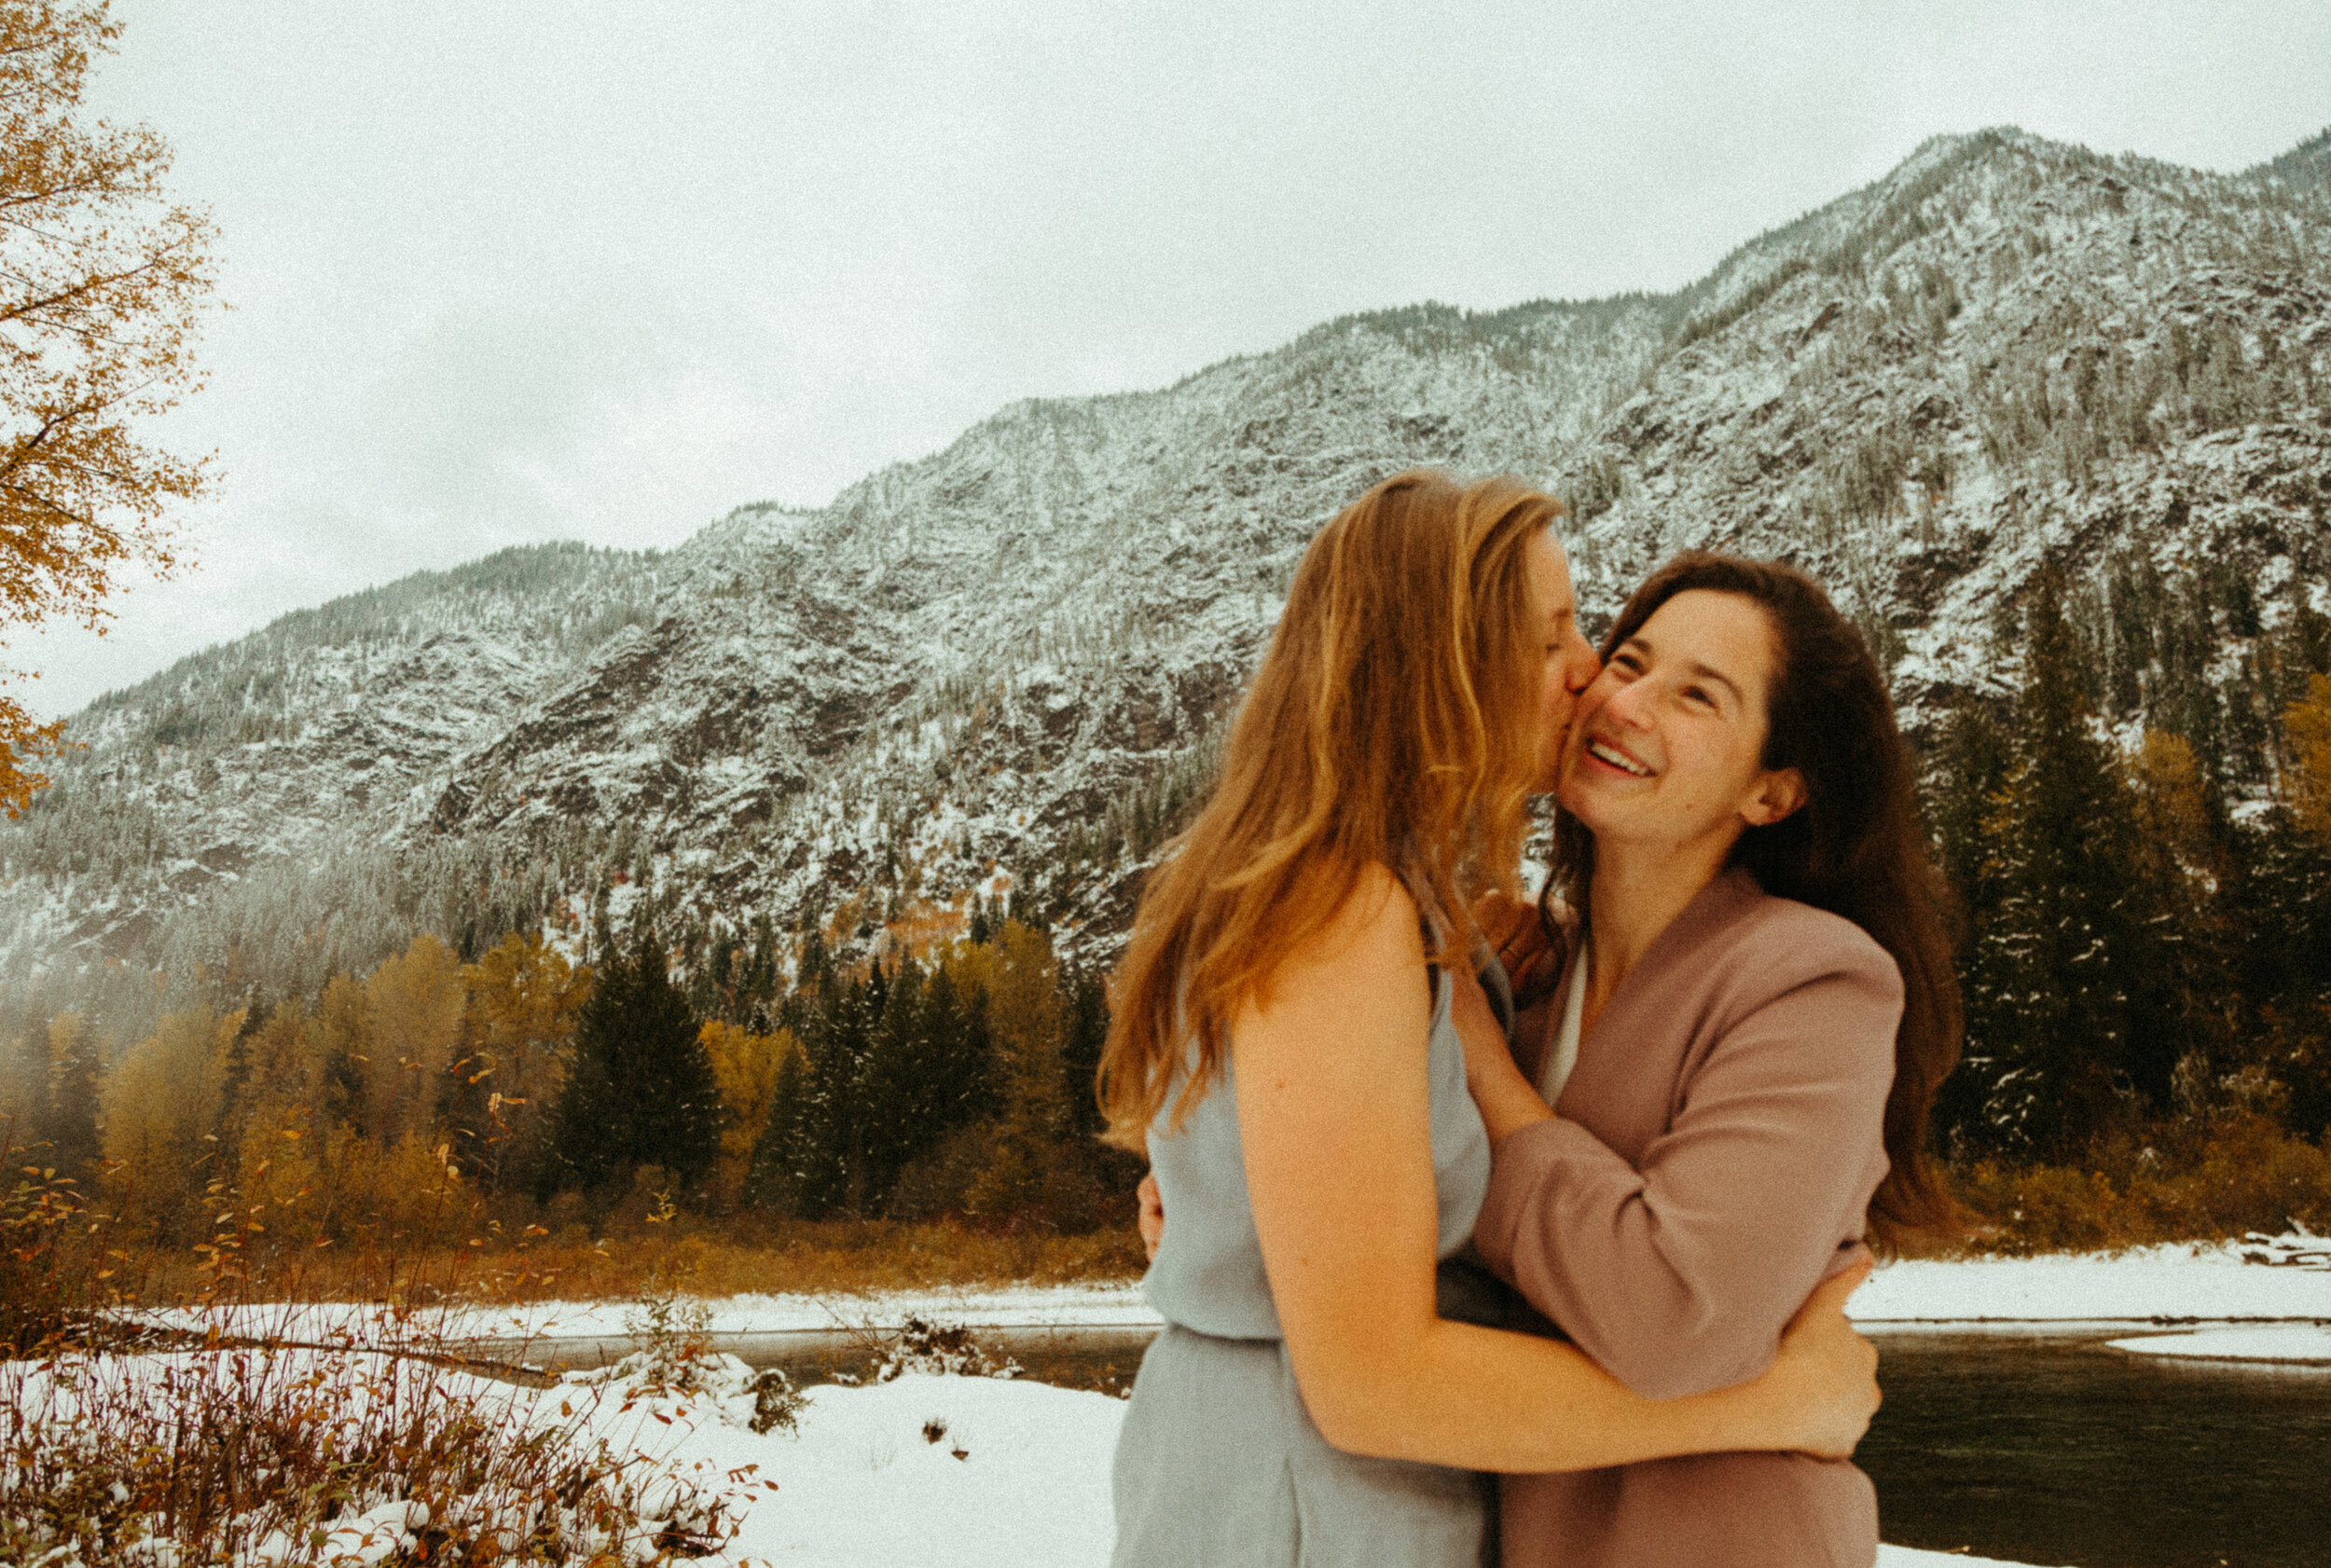 queer-gay-lesbian-trans-affirming-lgbtq-adventure-elopement-intimate-wedding-photographer-pnw-pacific-northwest-pnw-mountain-stream-forest-cowgay-tacoma-seattle-washington-portland-oregon-halle-roland-photography-non-binary-analog-film-artist-165-231.jpg